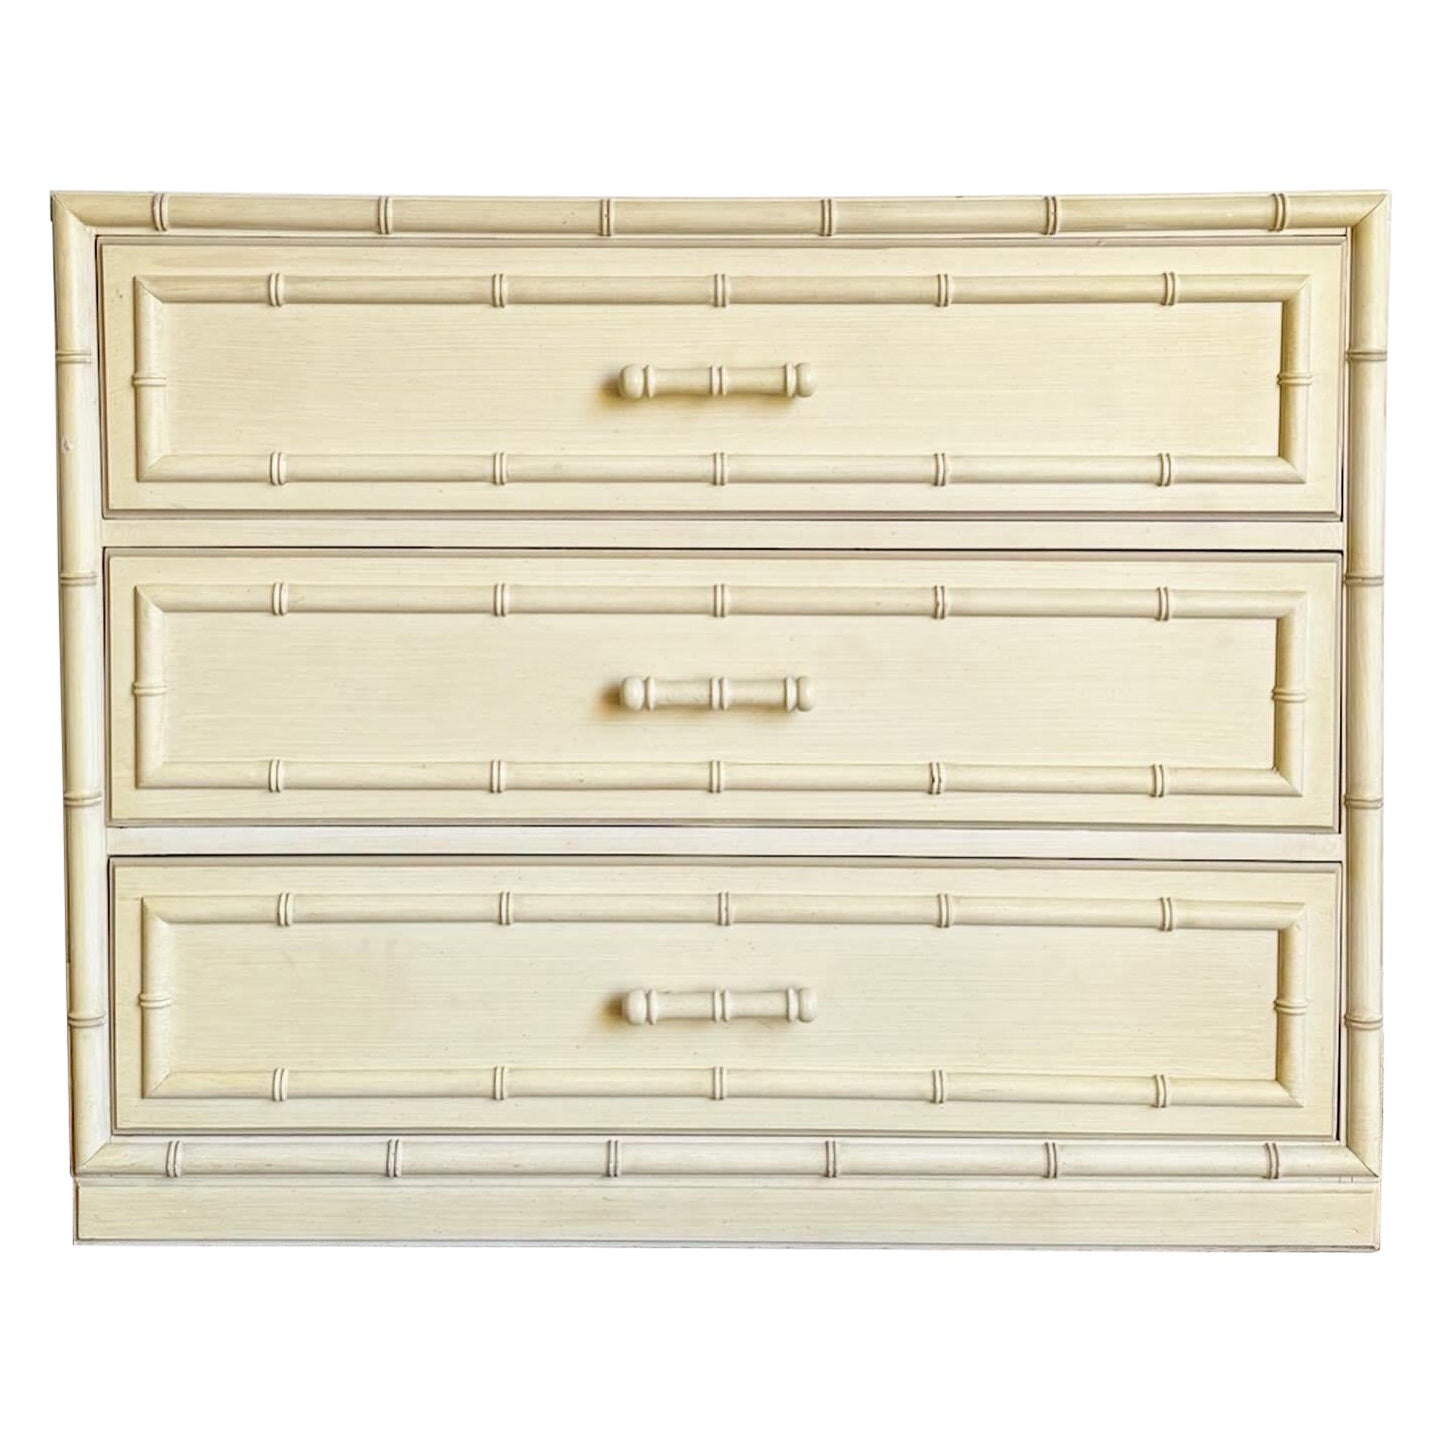 Regency Chic "Aloha" Chest of Drawers by Dixie - 3 Drawers For Sale